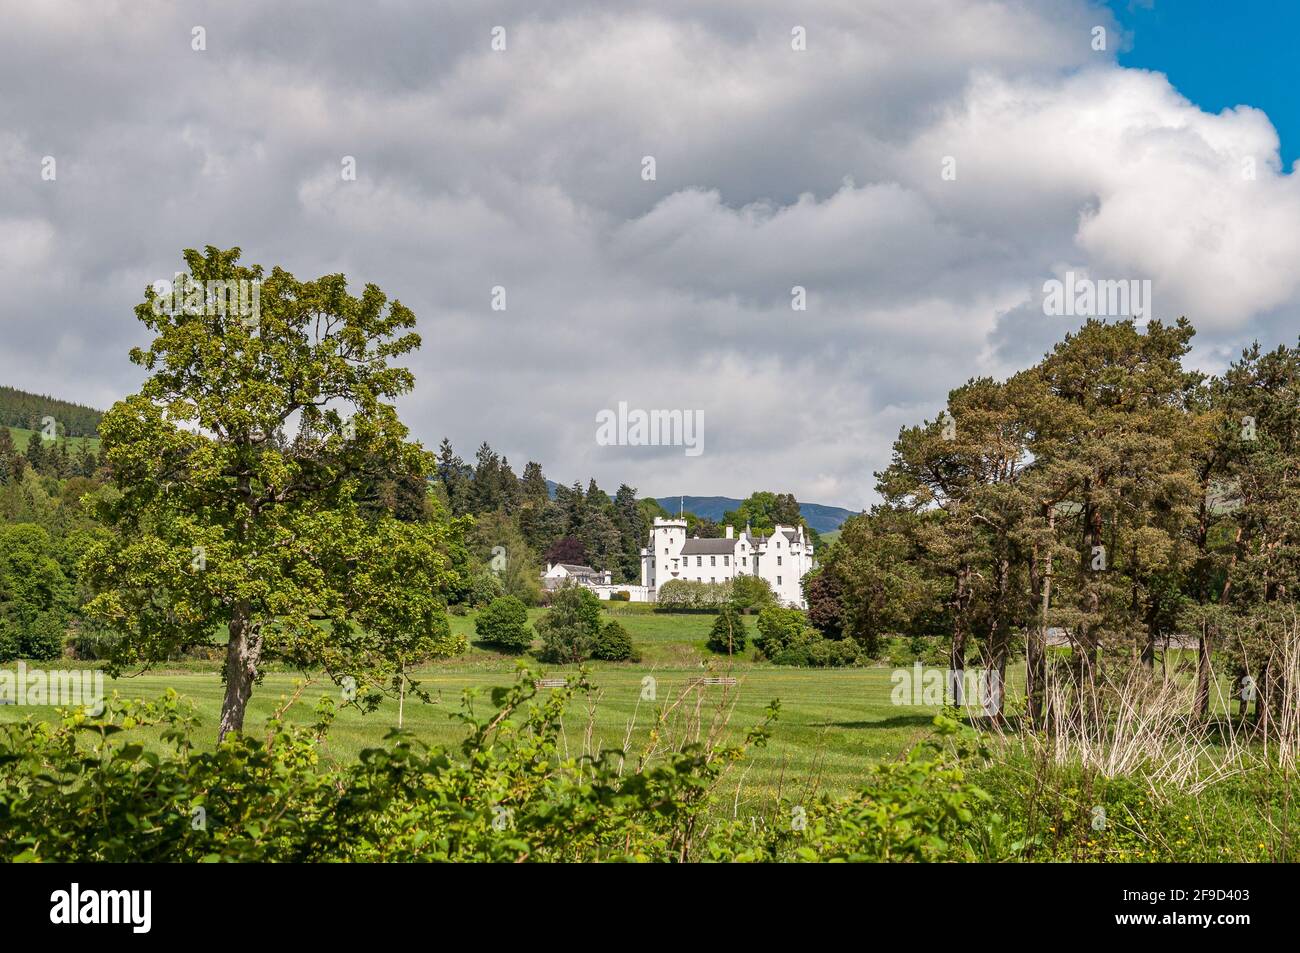 Blair Castle that stands out in the Scottish countryside. Concept: typical Scottish landscapes Stock Photo